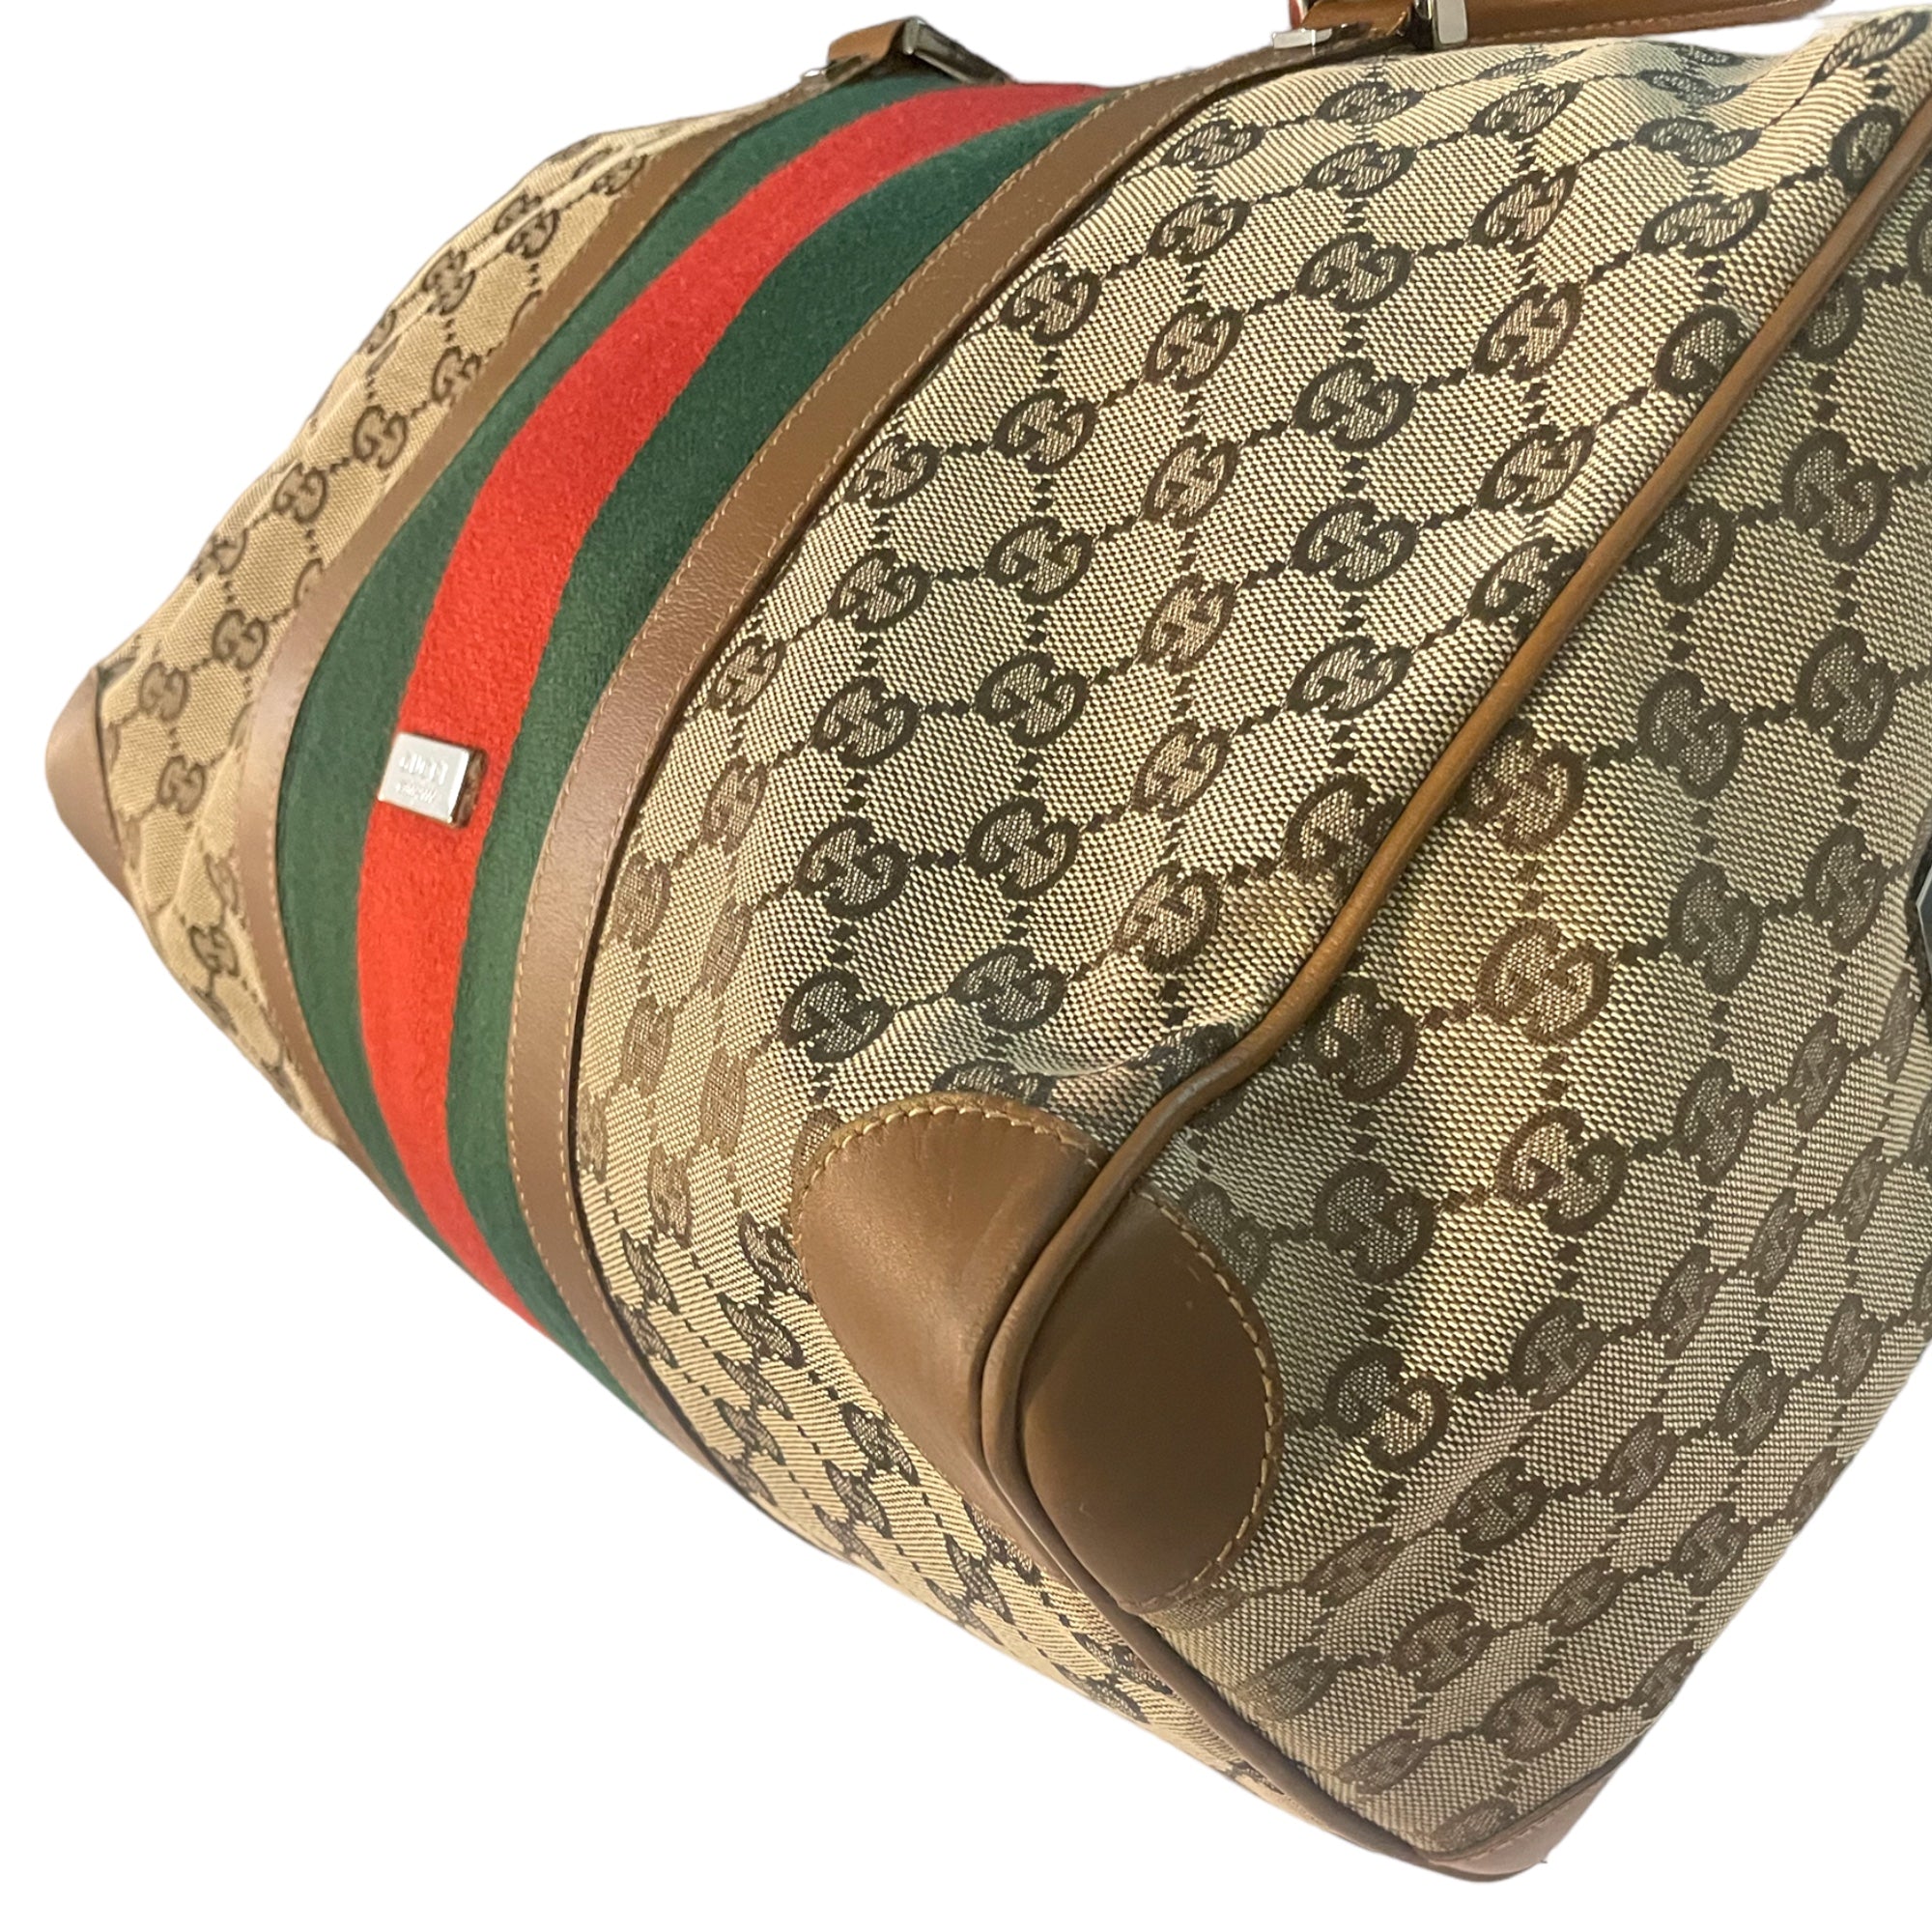 GUCCI Vintage Monogram Canvas LIMITED EDITION Web Boston Tote (EUC Numbered)